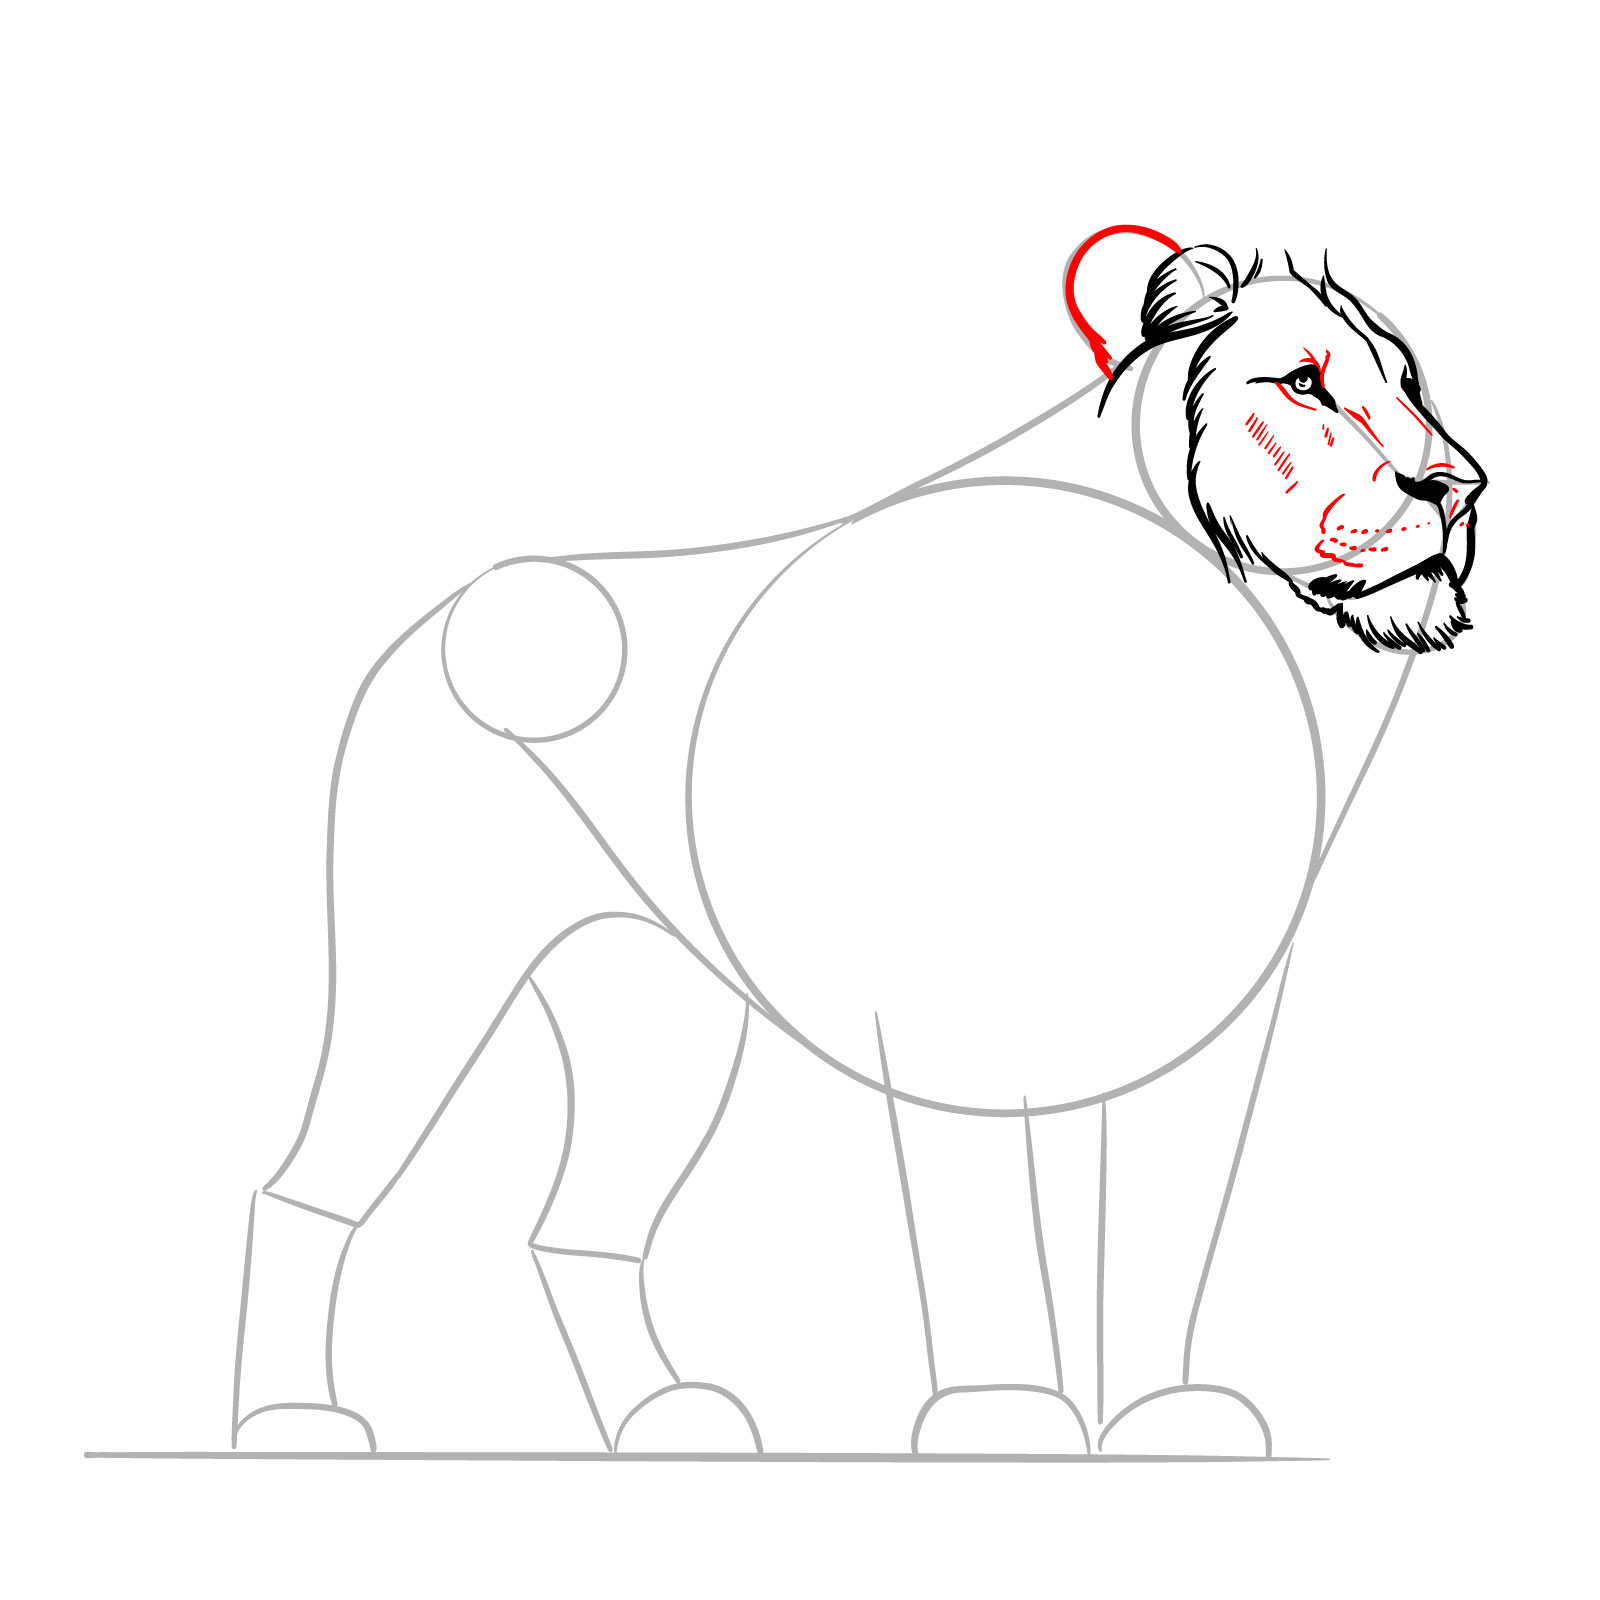 Finalizing the ear outline and facial details in a standing lion illustration guide - step 07